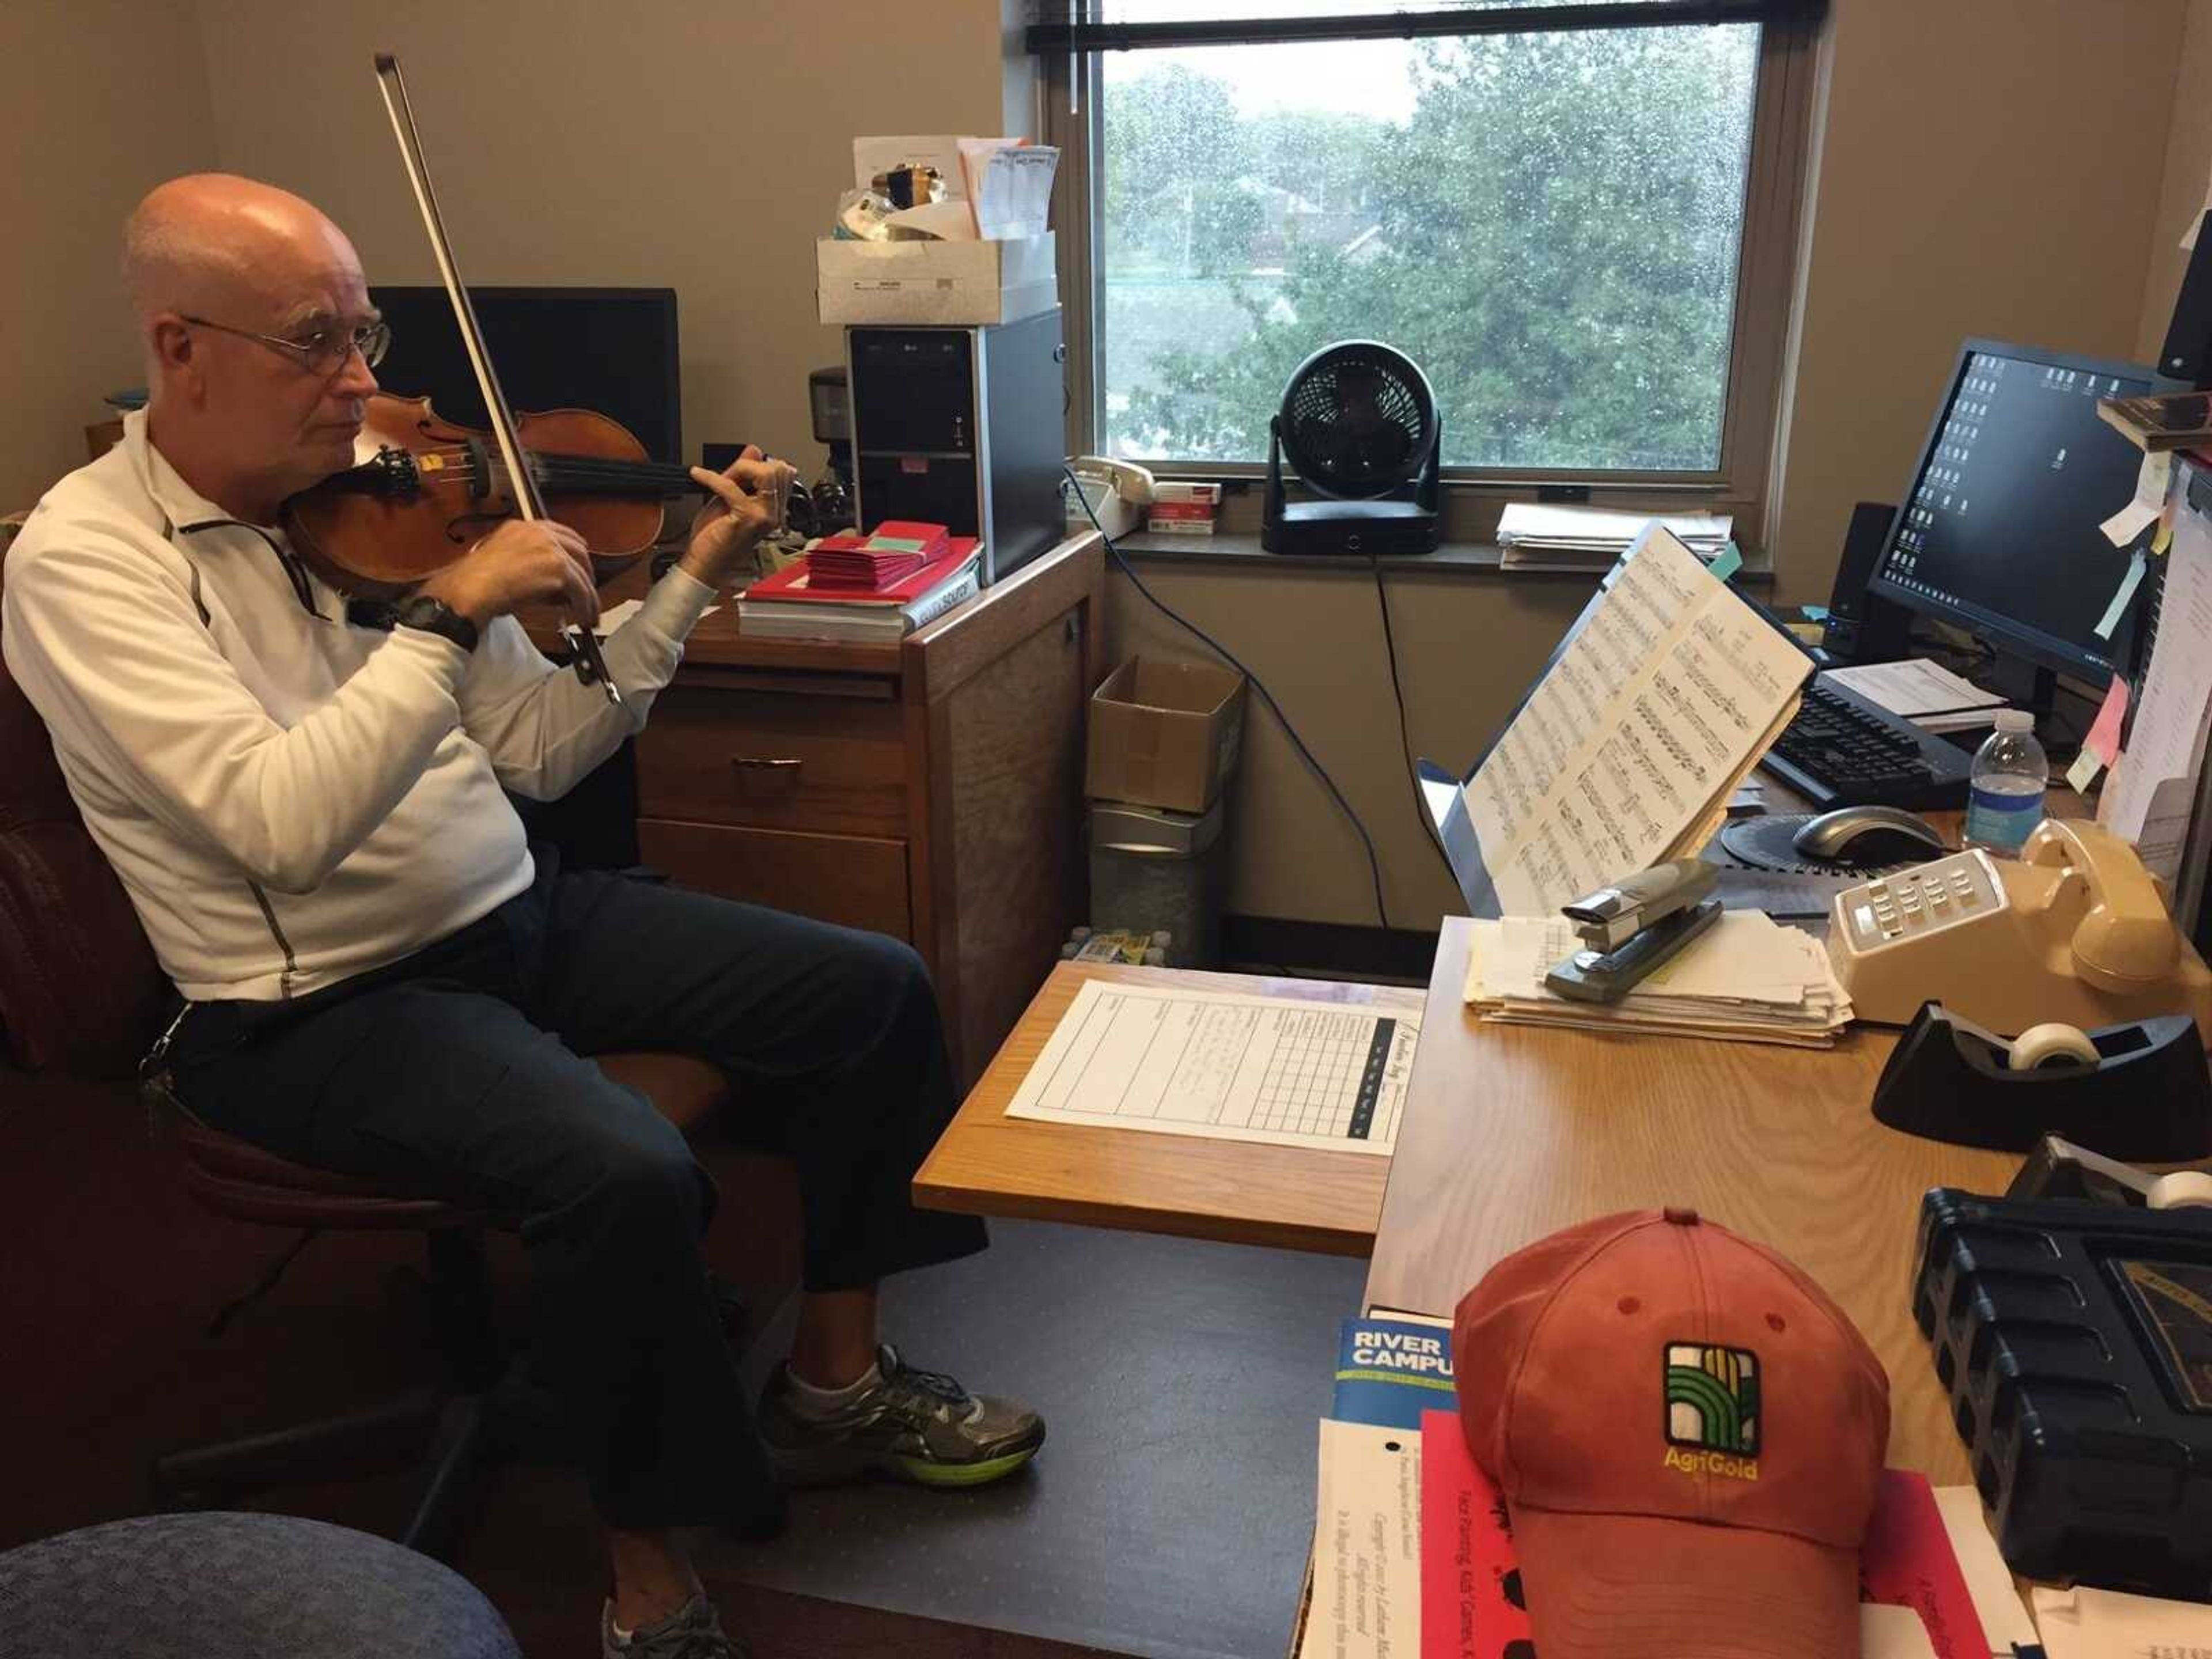 Steve Schaffner, director of the Music Academy practicing the violin in his office.